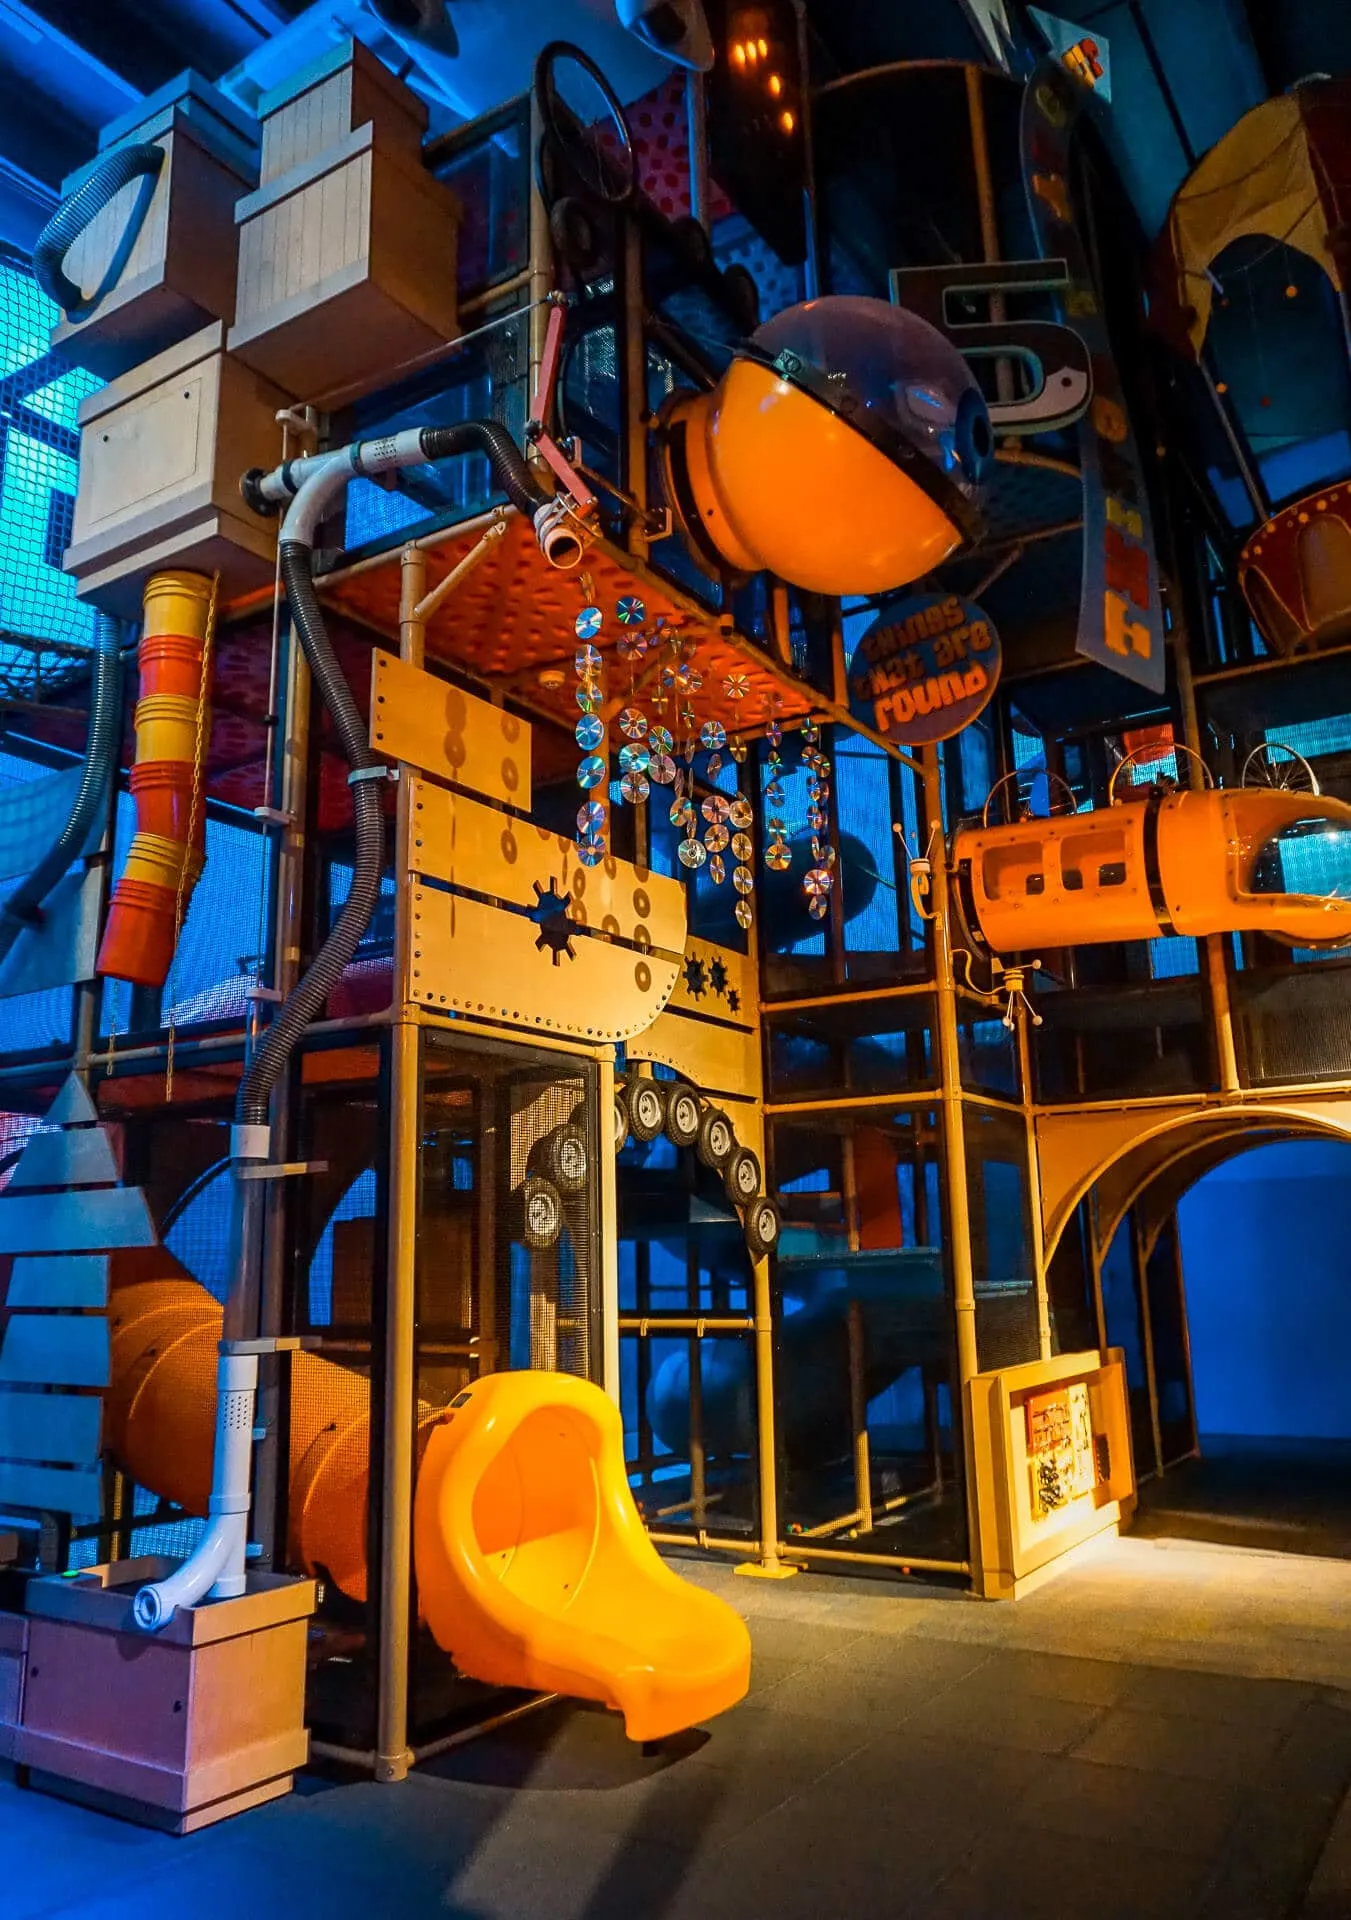 A whimsical orange and blue playground at Curio City.